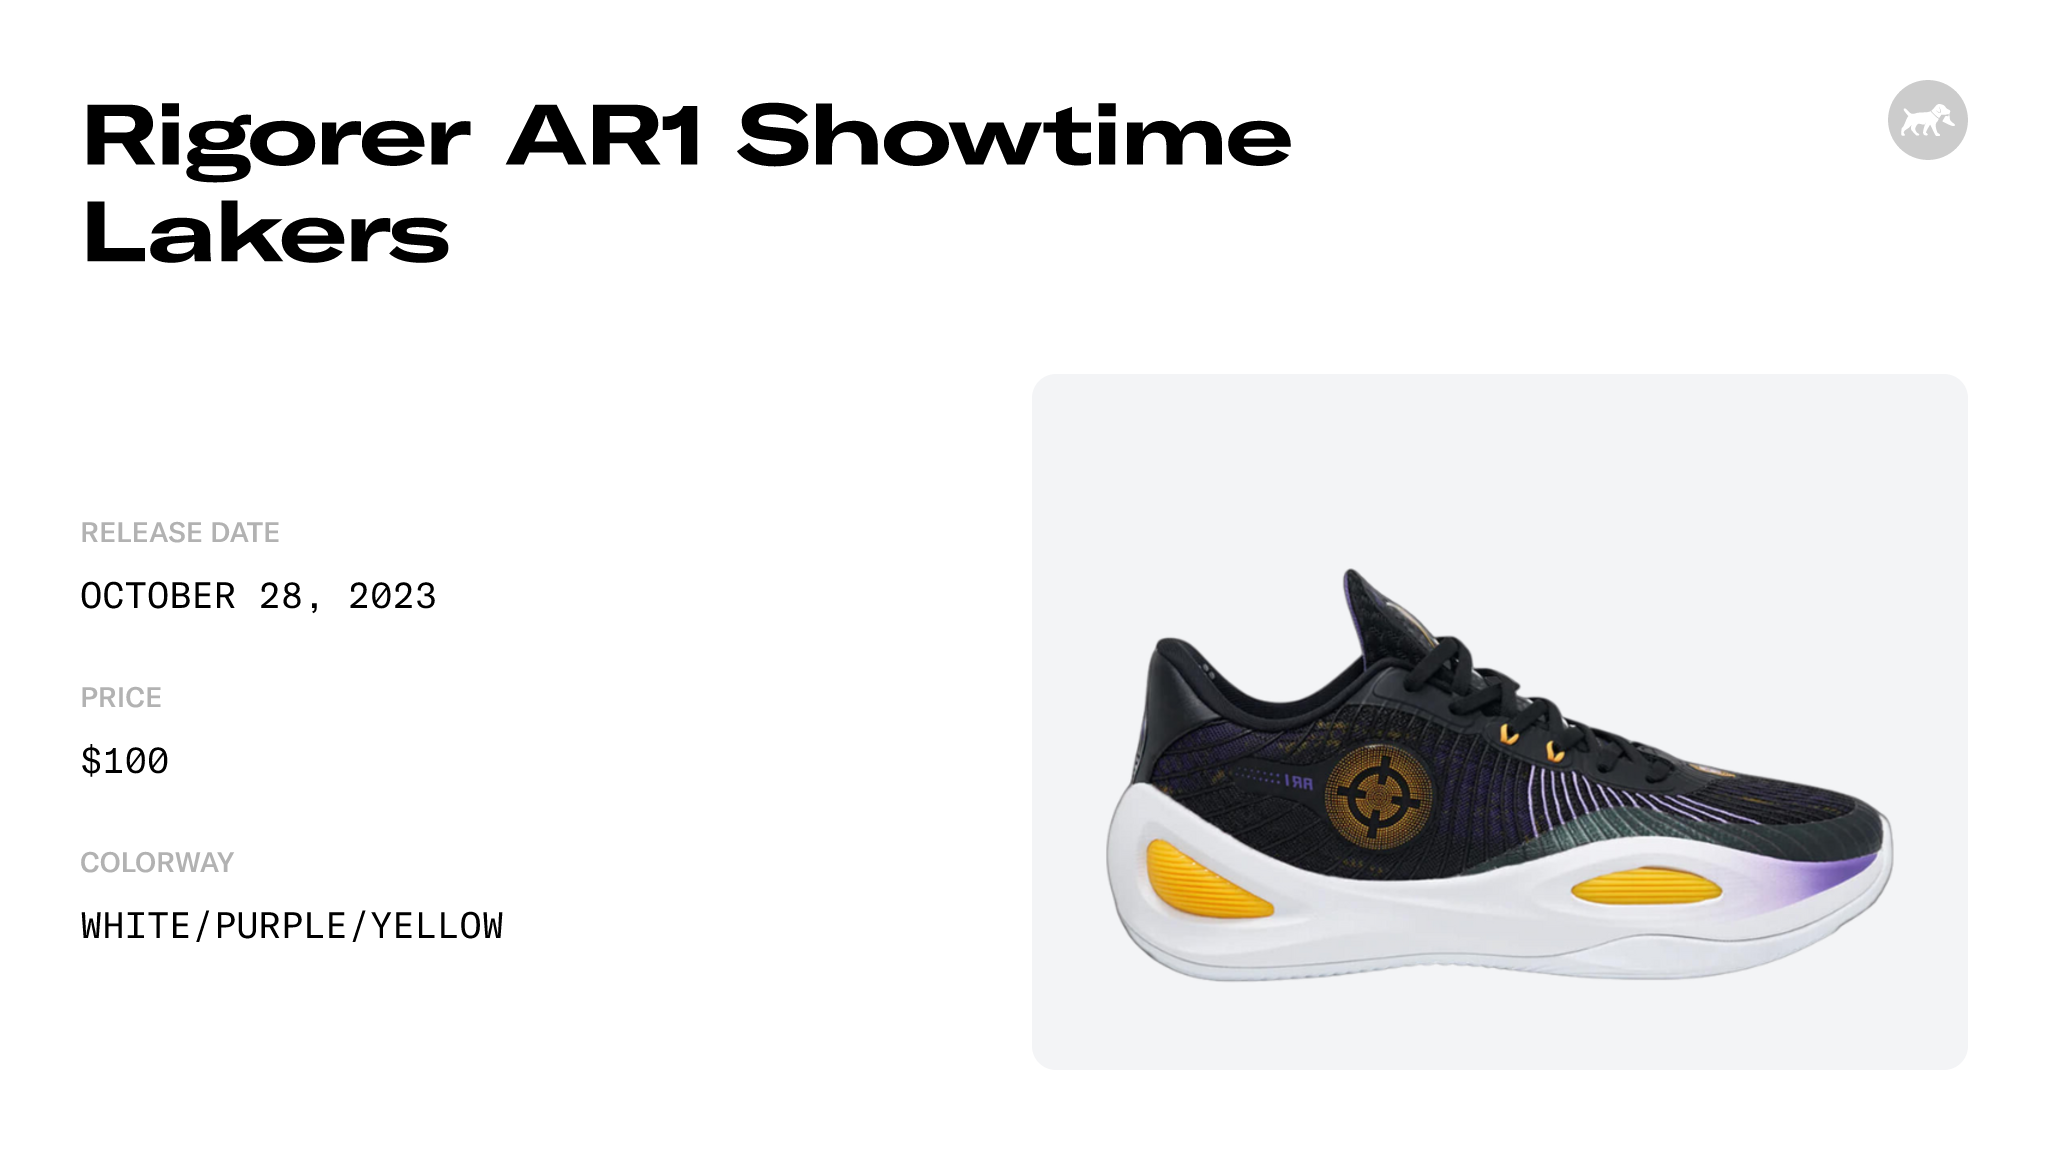 Rigorer AR1 Showtime - Lakers Raffles and Z323360104-033 Release Date